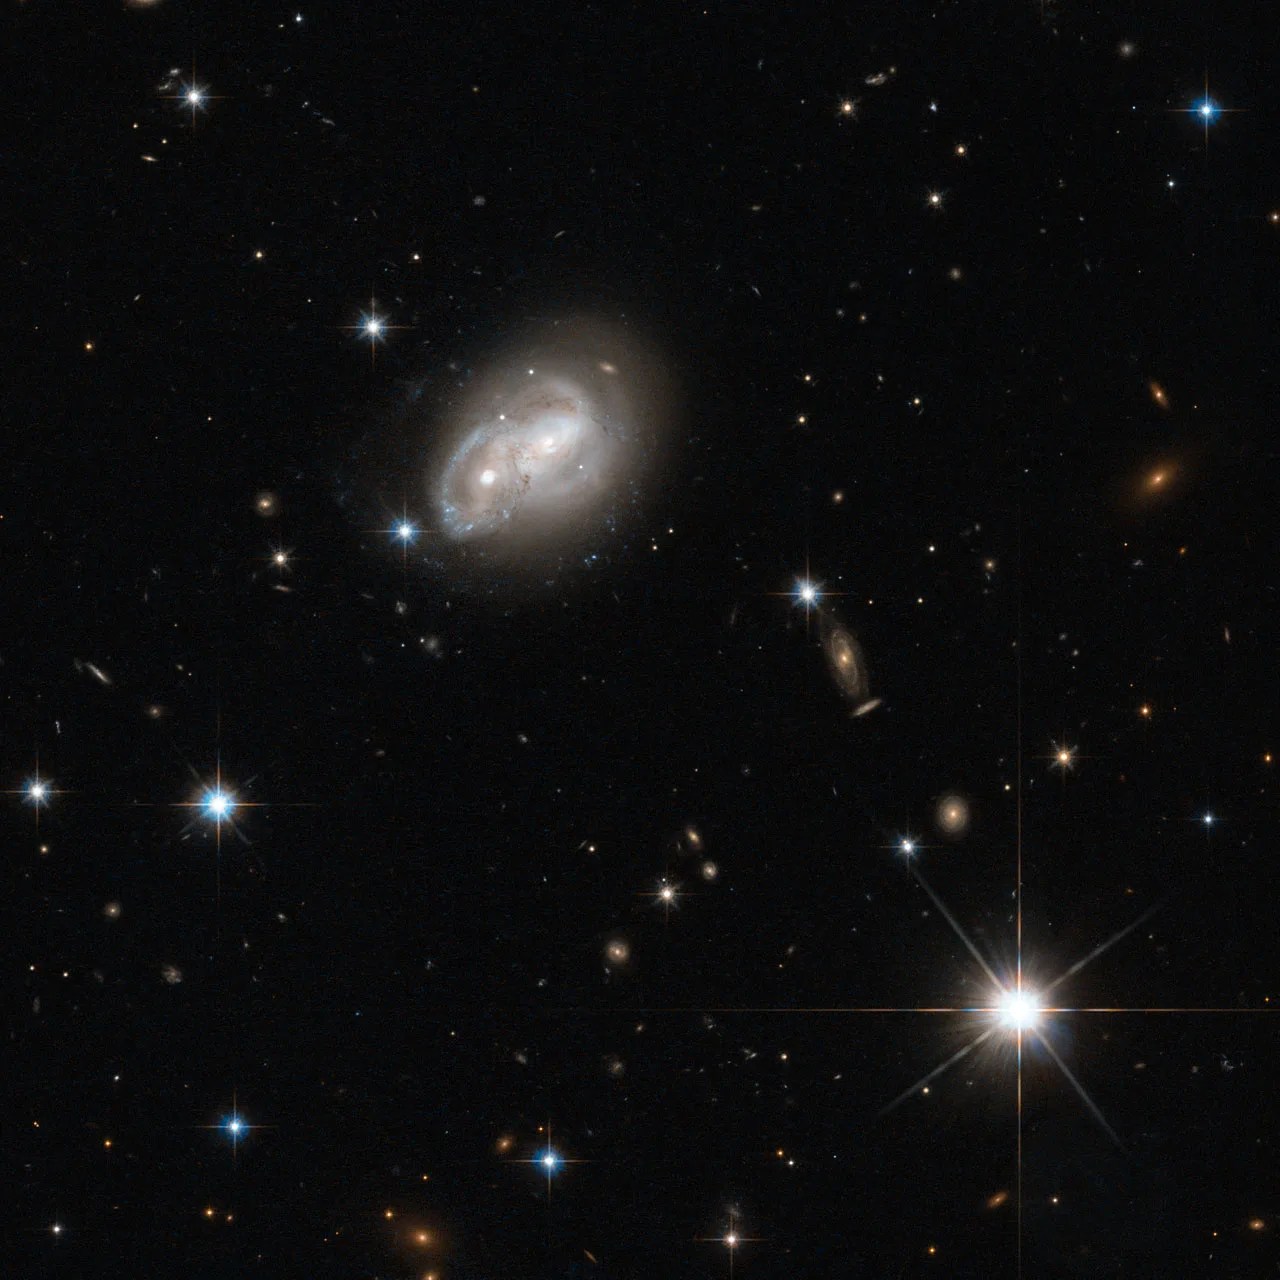 Two spiral galaxy disks intertwining as they interact, with their cores looking like a pair of eyes, against a black backdrop of other galaxies.